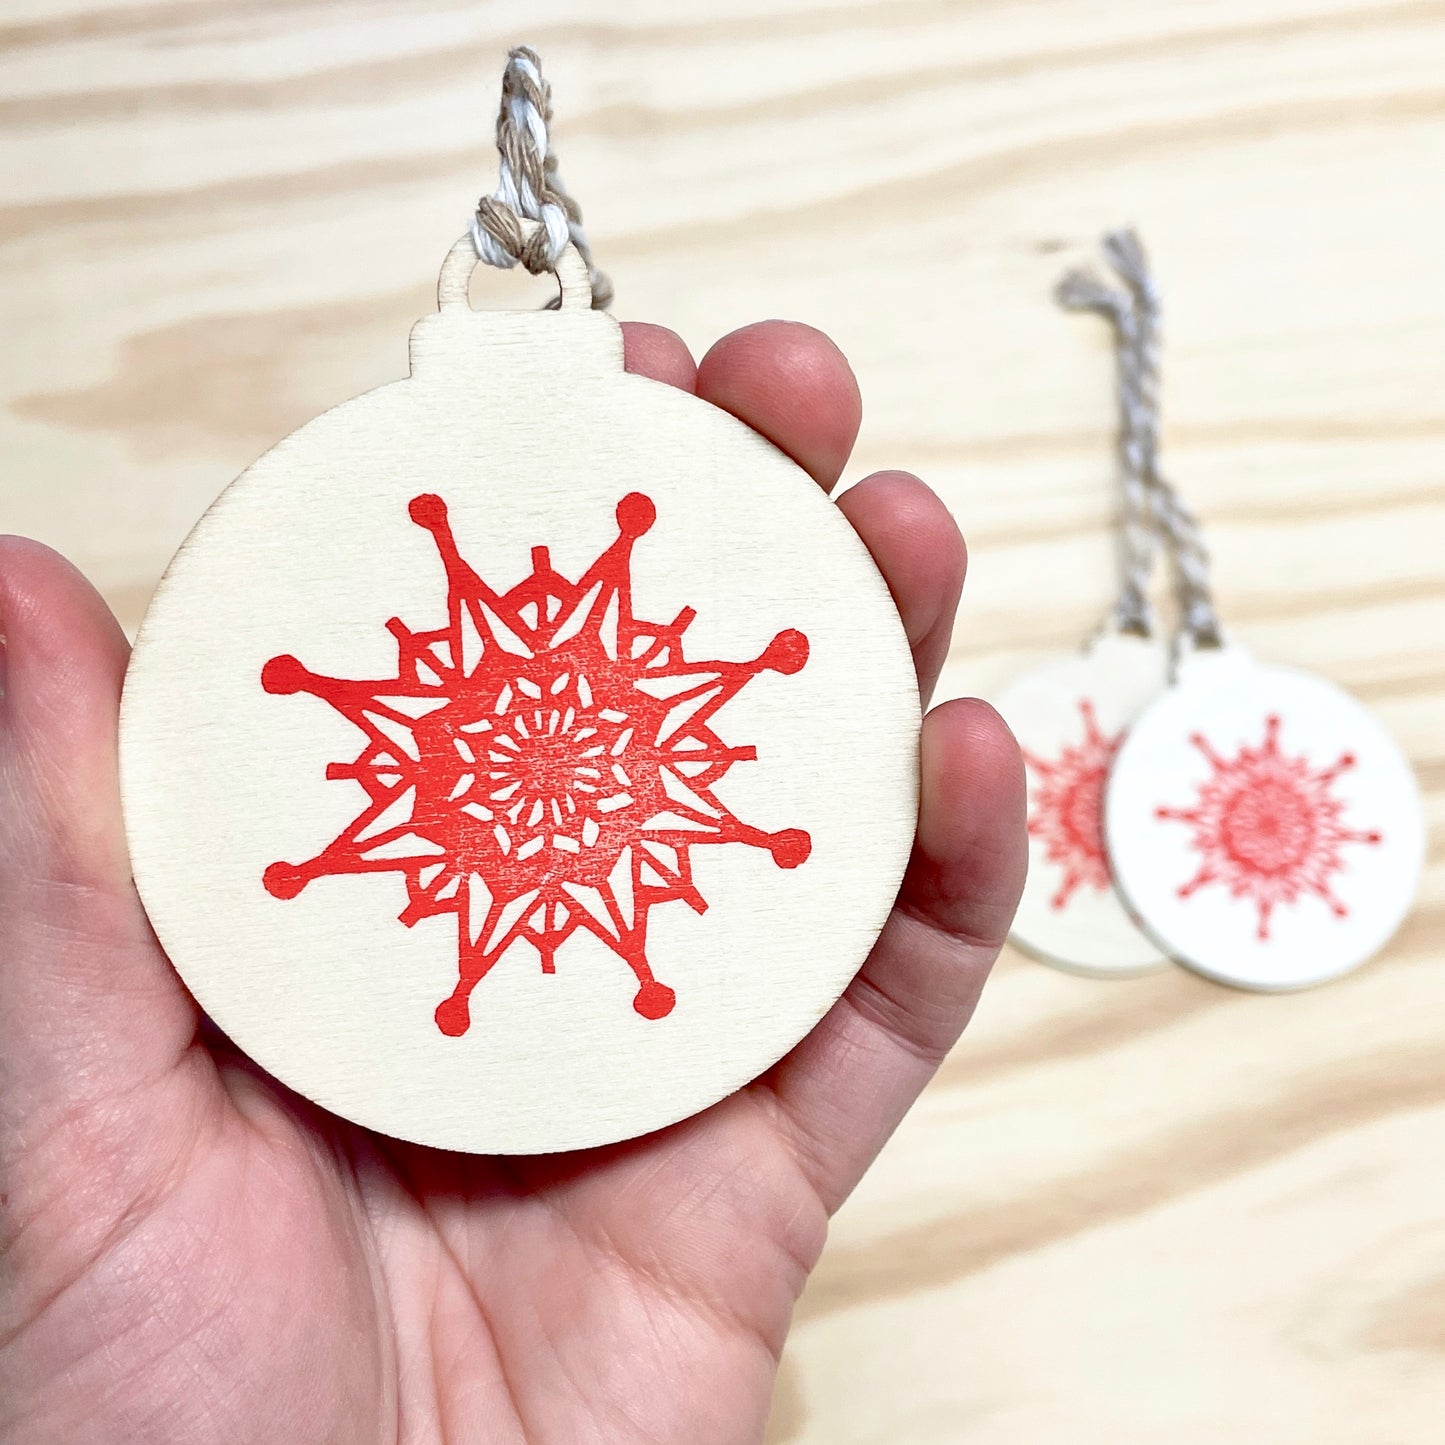 Snowflake Gift Tags - Wood Ornaments - Red Set of 3